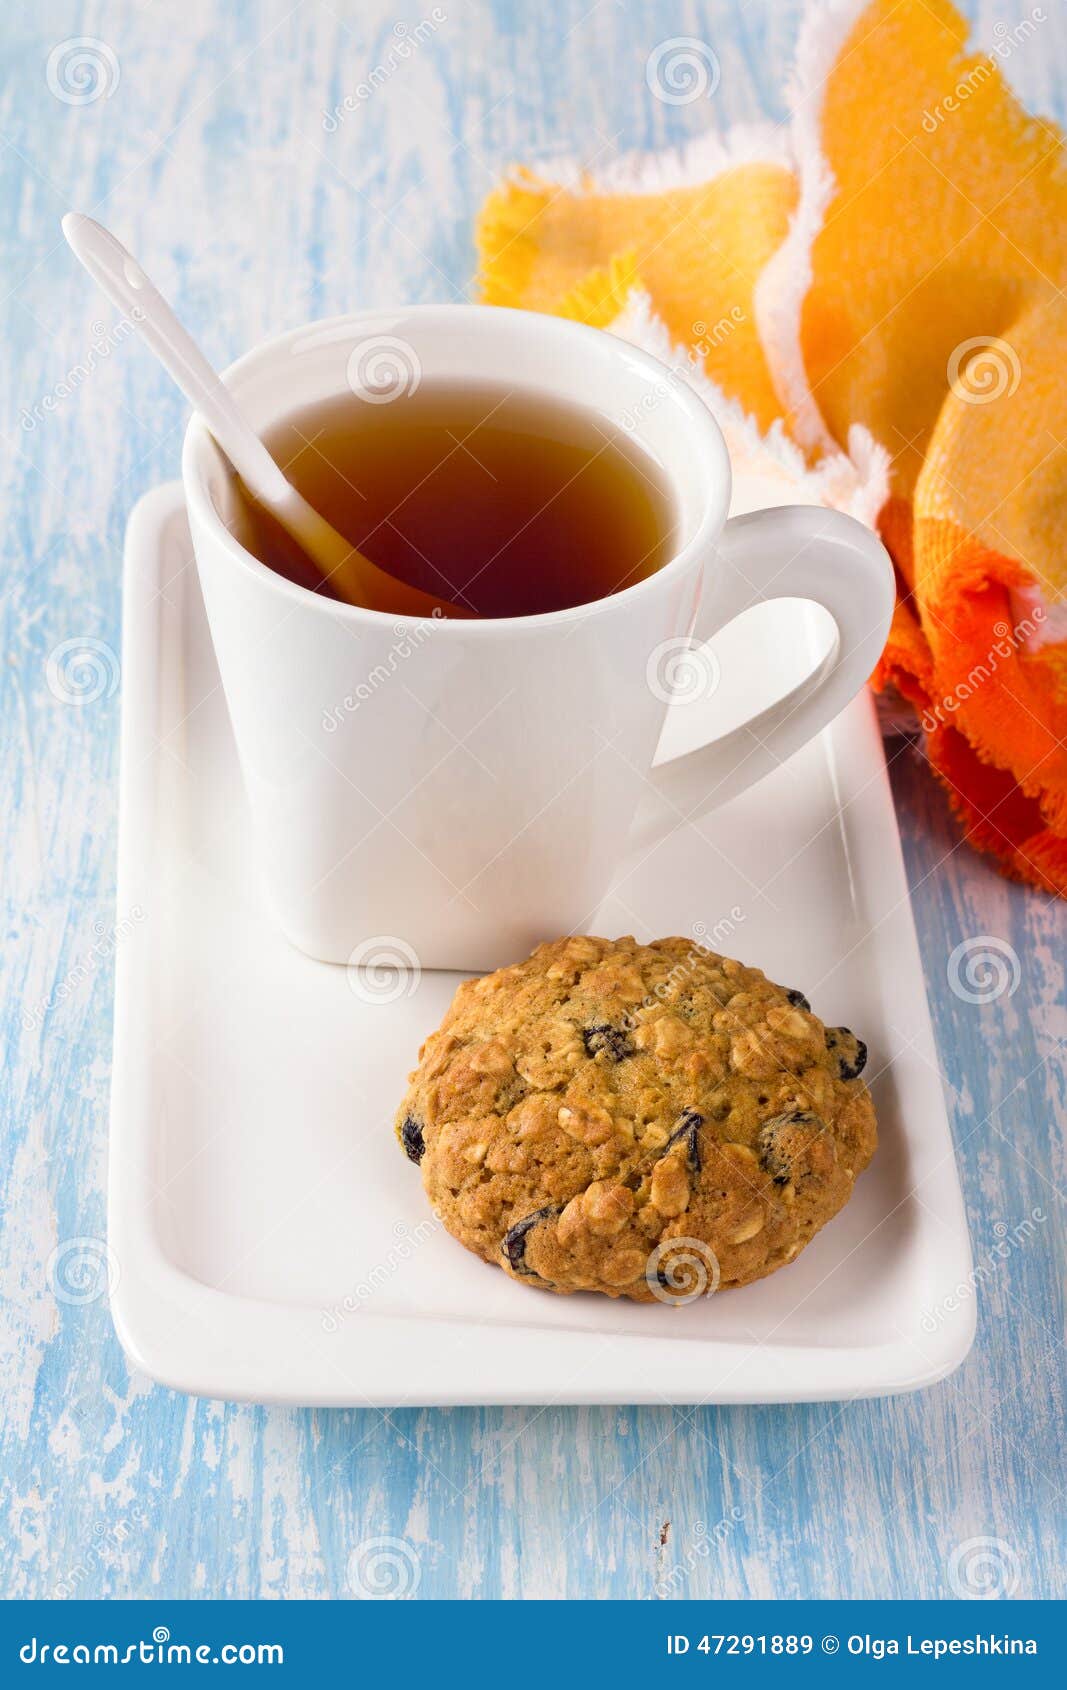 Cup Of Tea With Diet Oatmeal Cookies On A White Plate Stock Image - Image of healthy, lifestyle ...